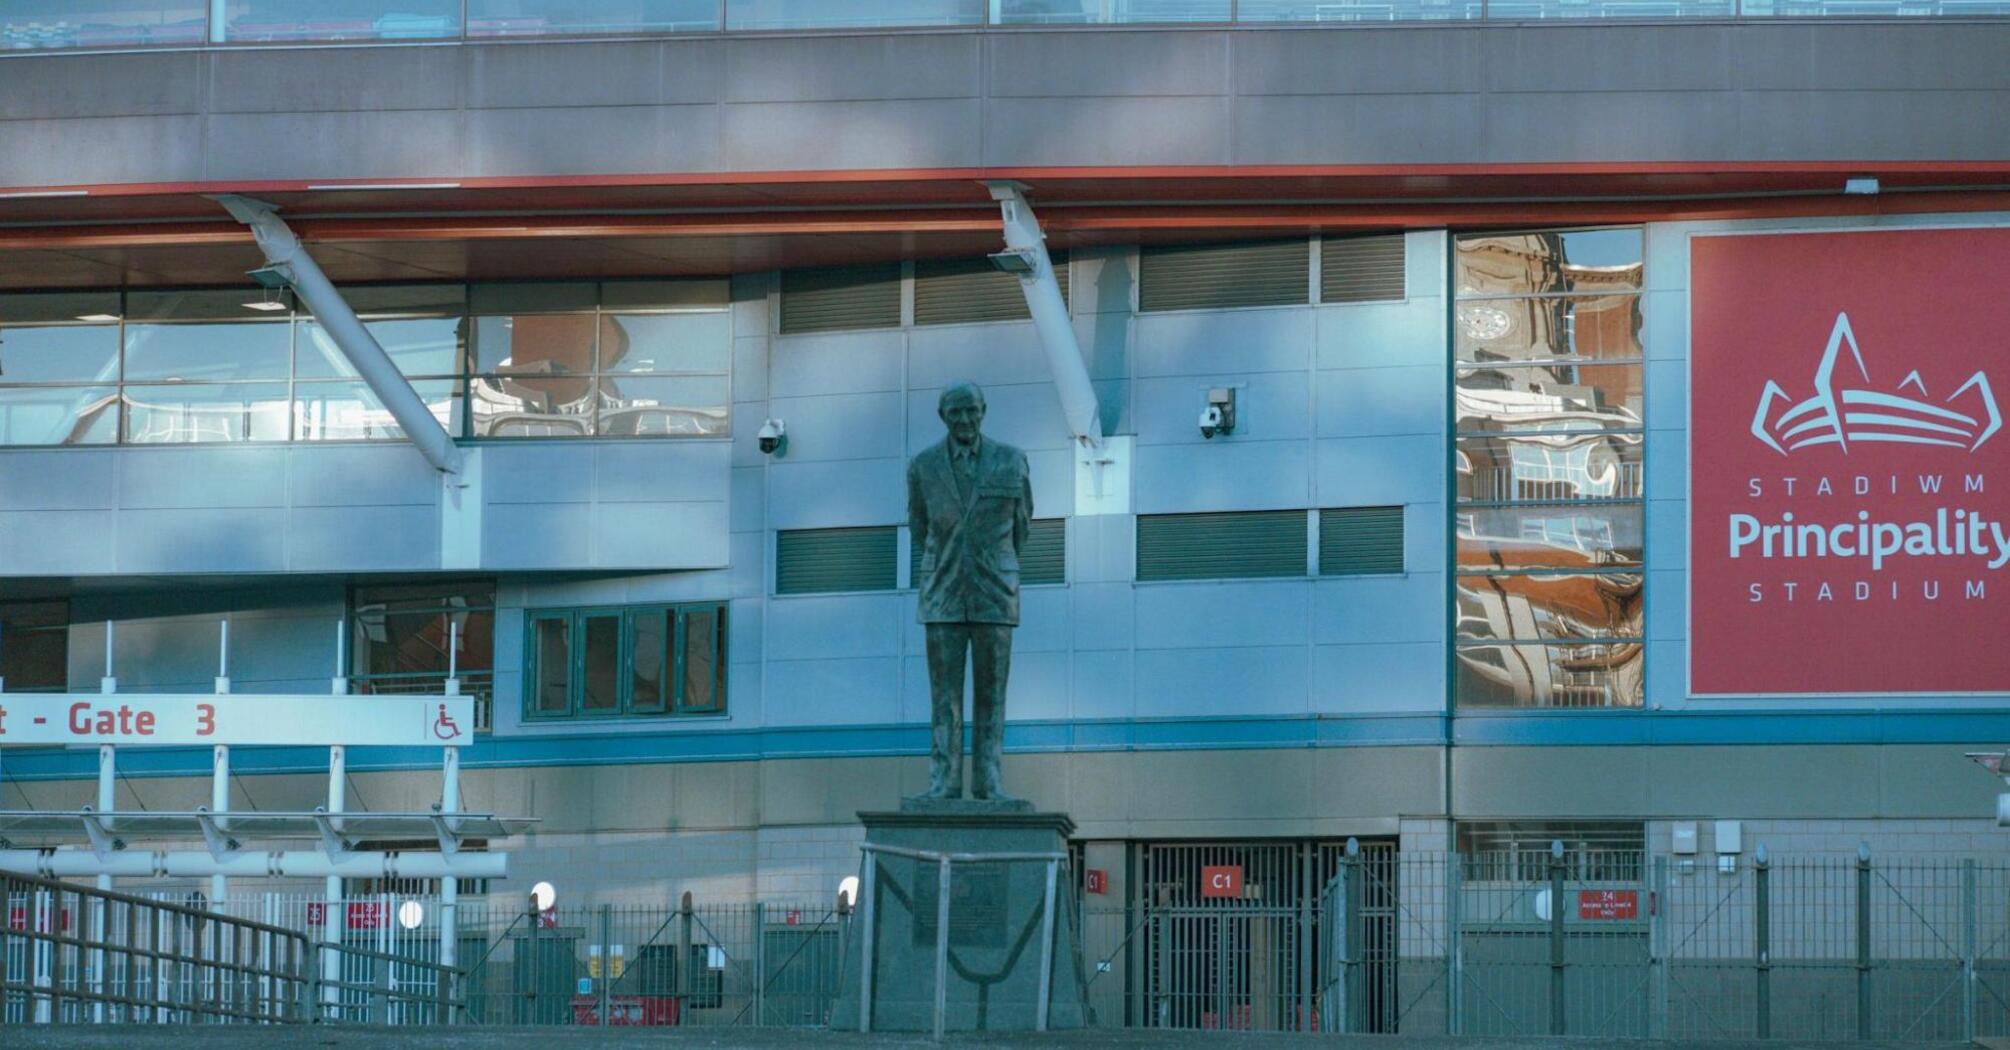 Statue in front of Principality Stadium in Cardiff